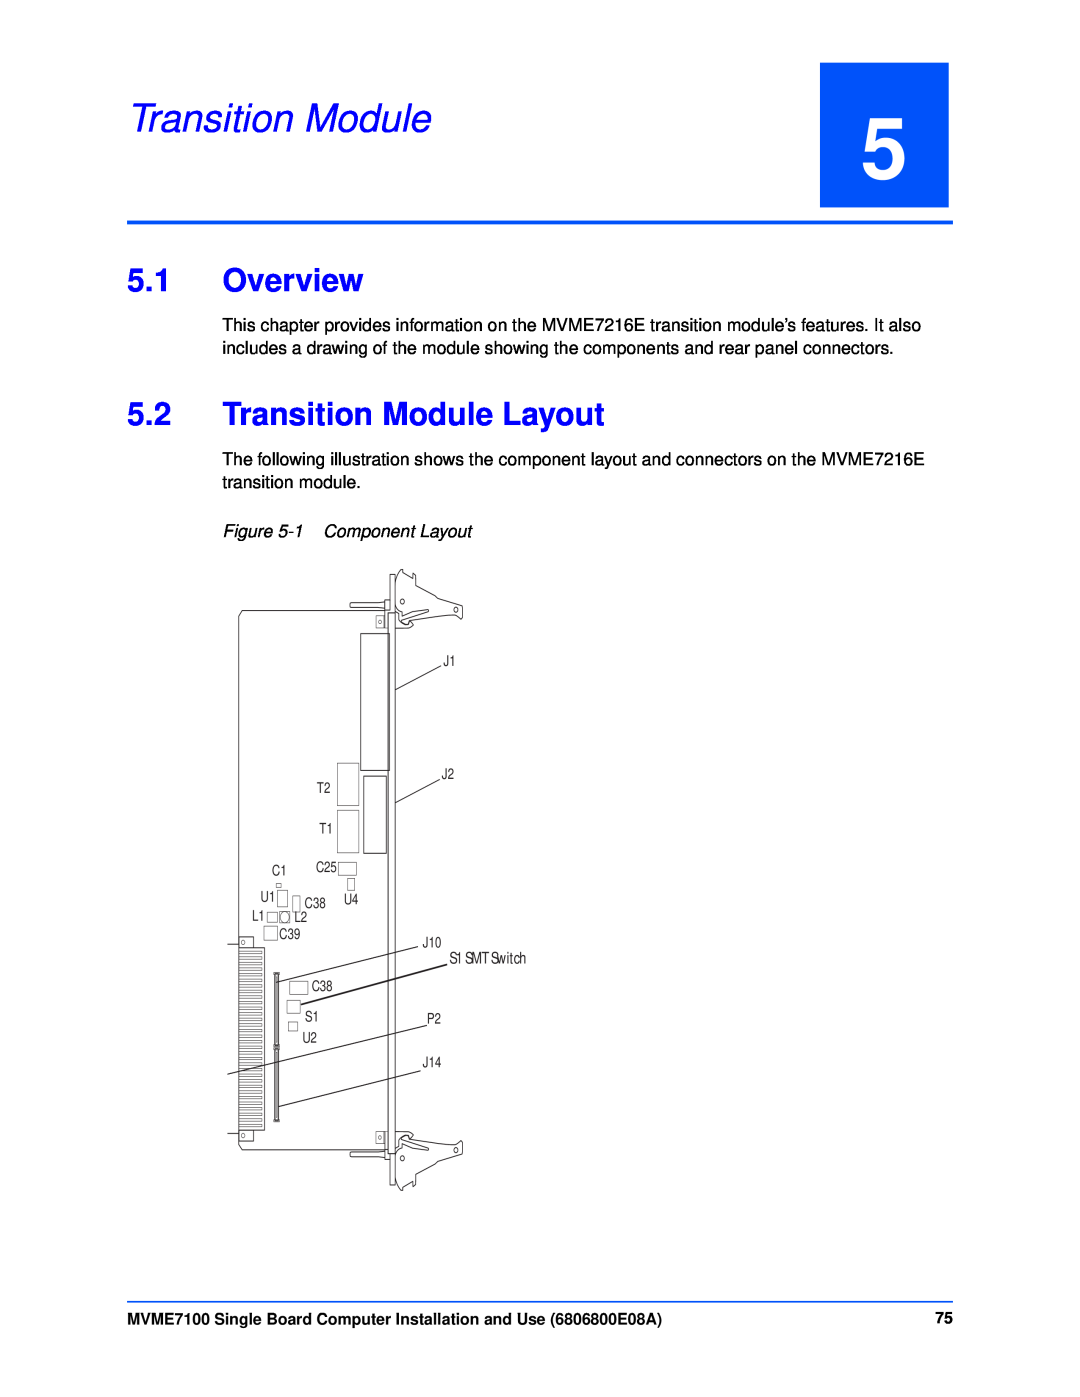 Emerson MVME7100 manual Overview, Transition Module Layout, 1 Component Layout 